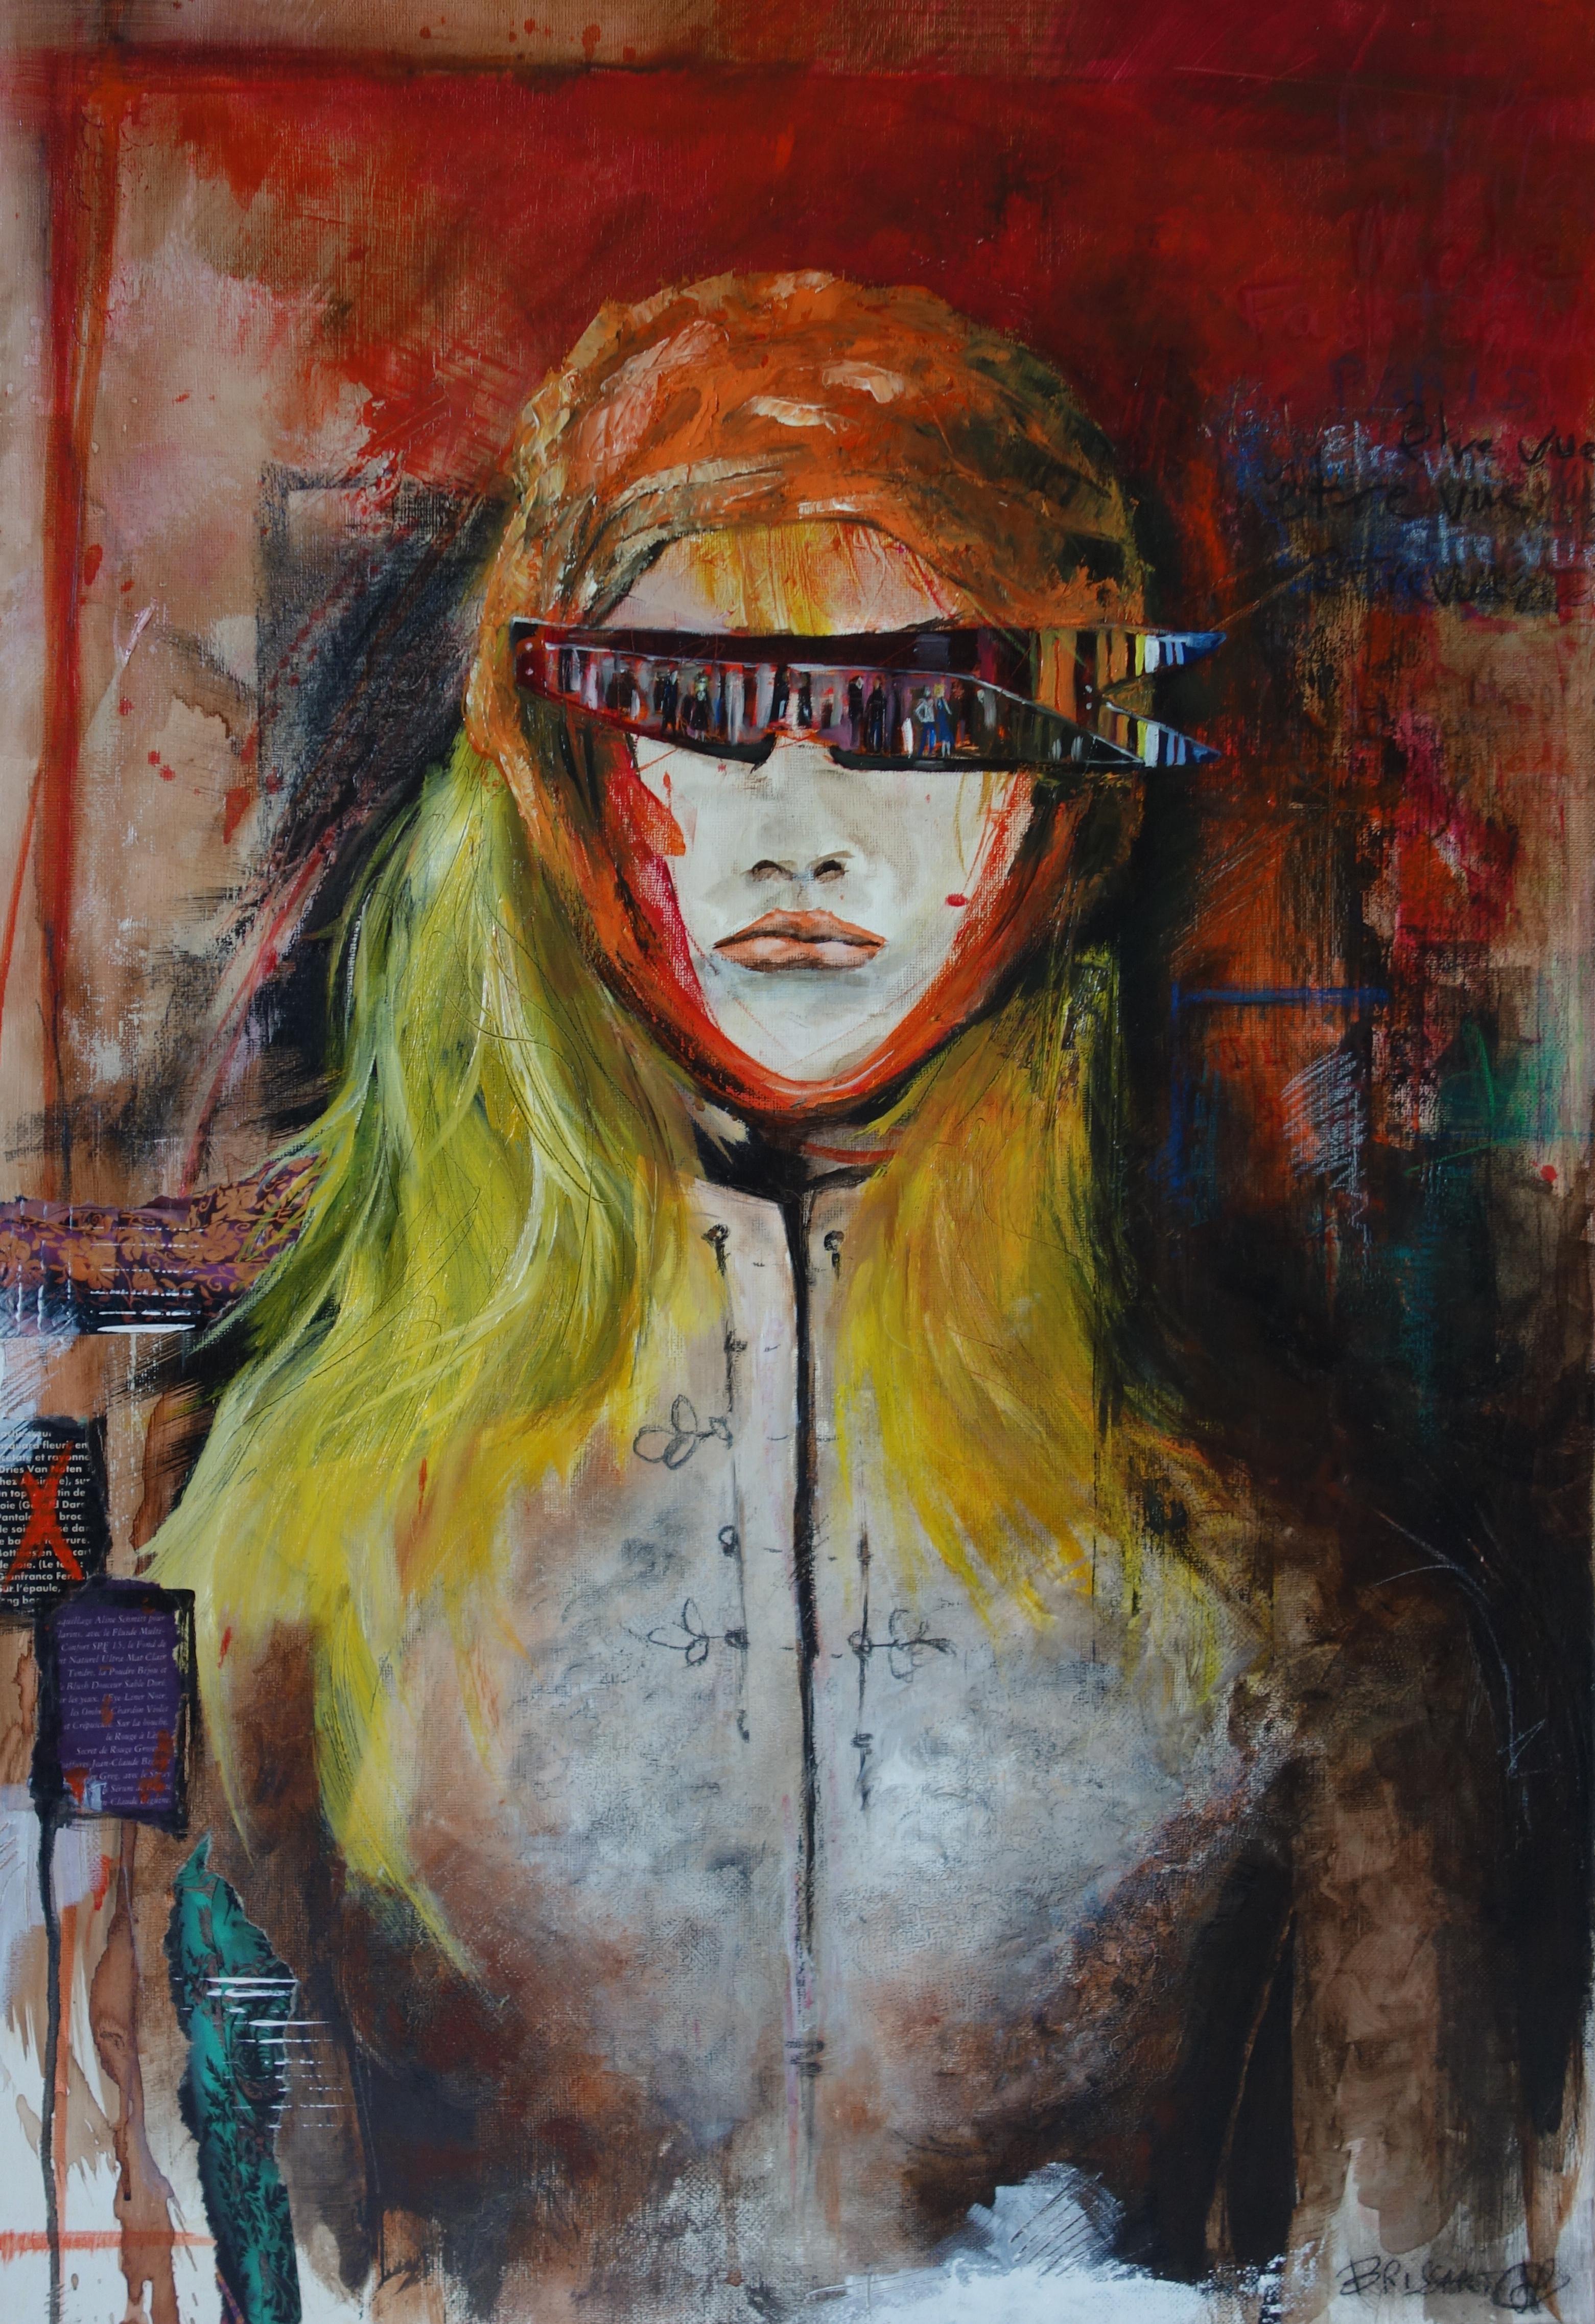 The woman with glasses